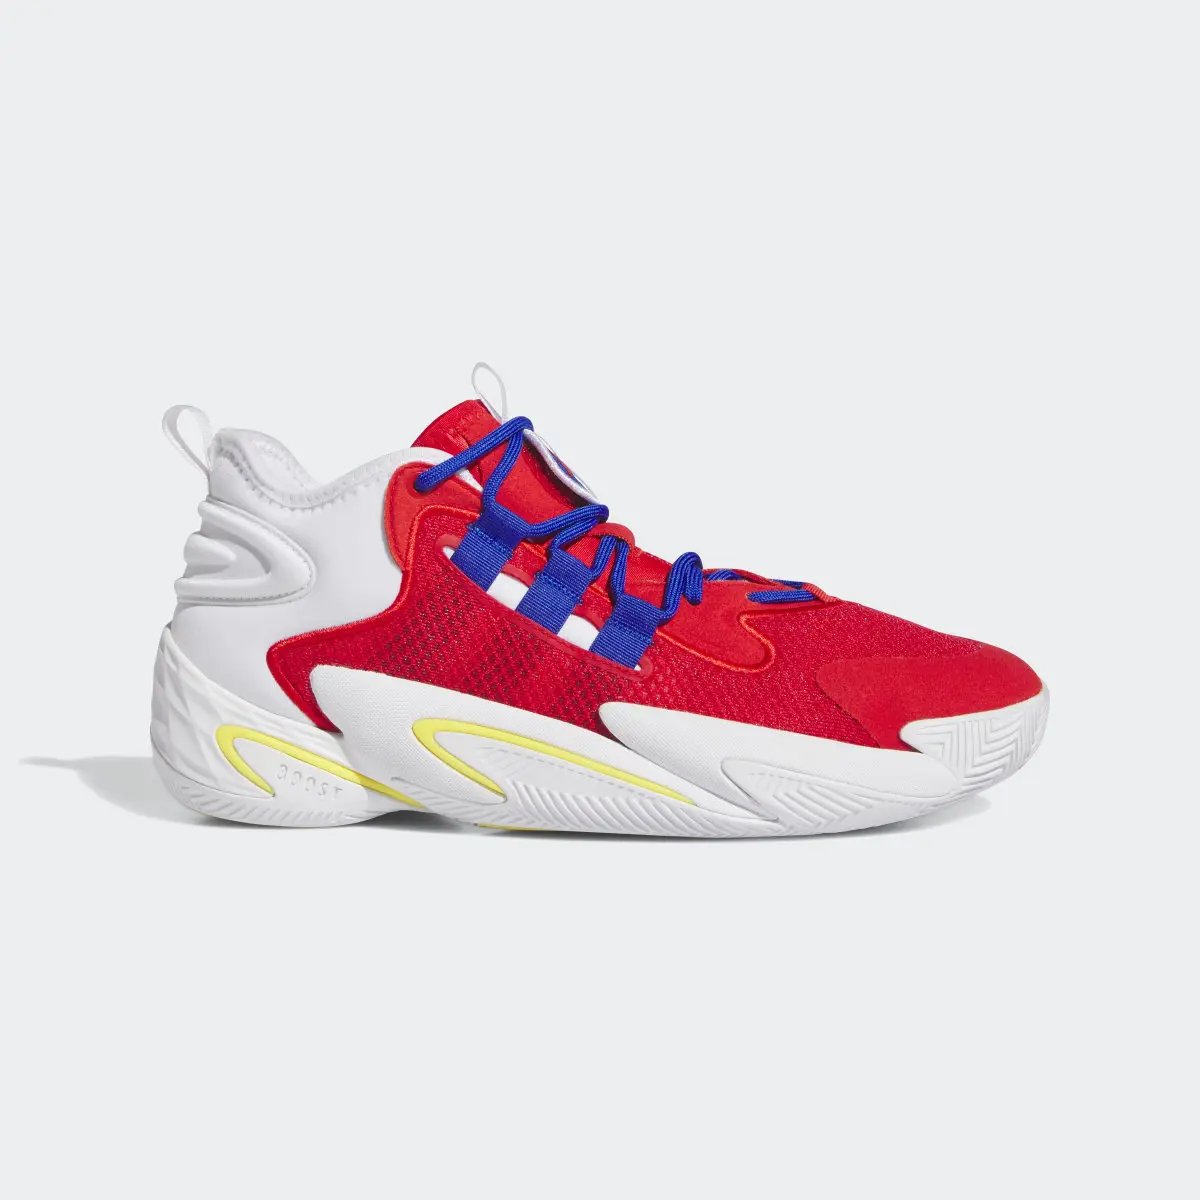 Adidas BYW Select Shoes. 2